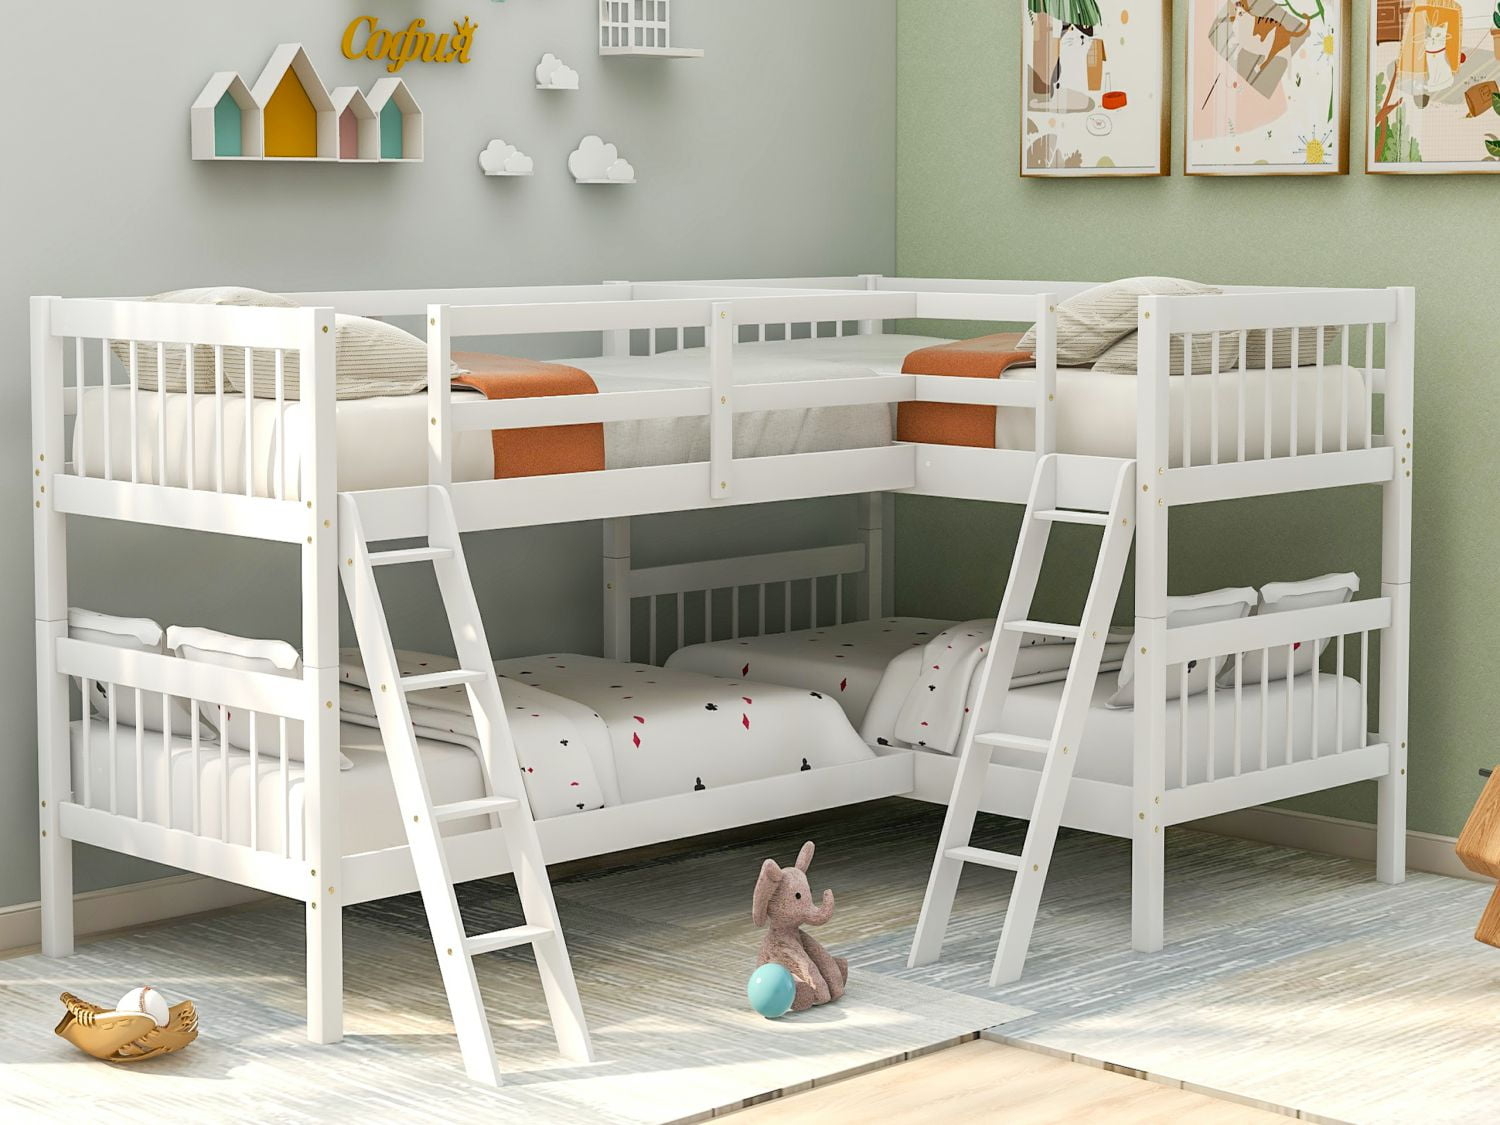 Twin Over Bunk Bed Full, Cot Bunk Beds For Twins